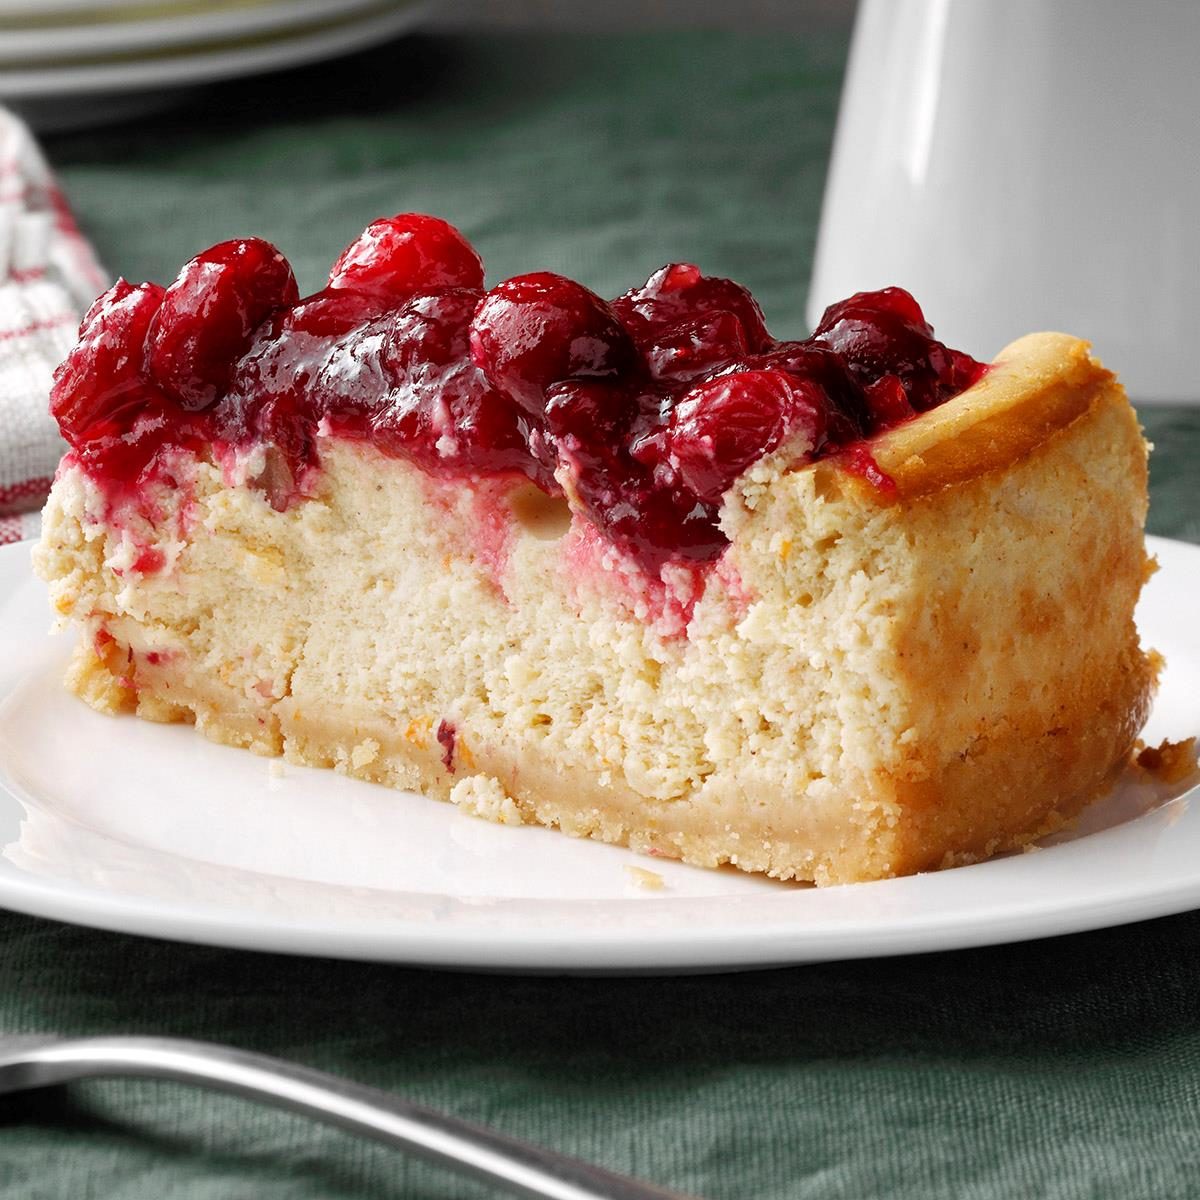 Festive Cranberry Topped Cheesecake Exps Tohca23 41242 Dr 10 12 2b